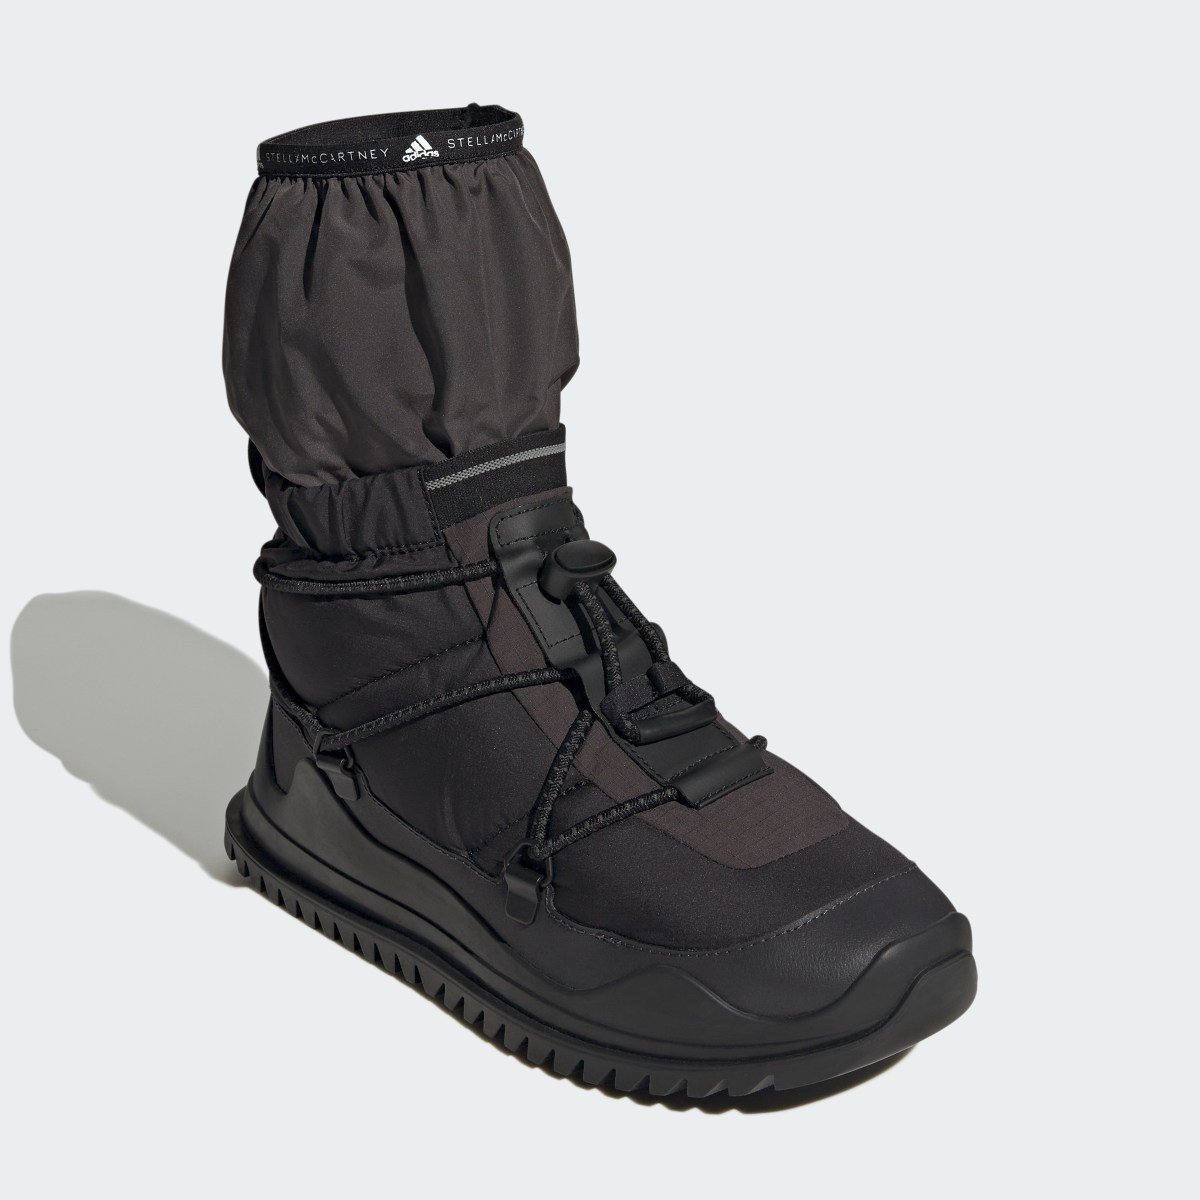 Adidas by Stella McCartney COLD.RDY Winter Boots. 5